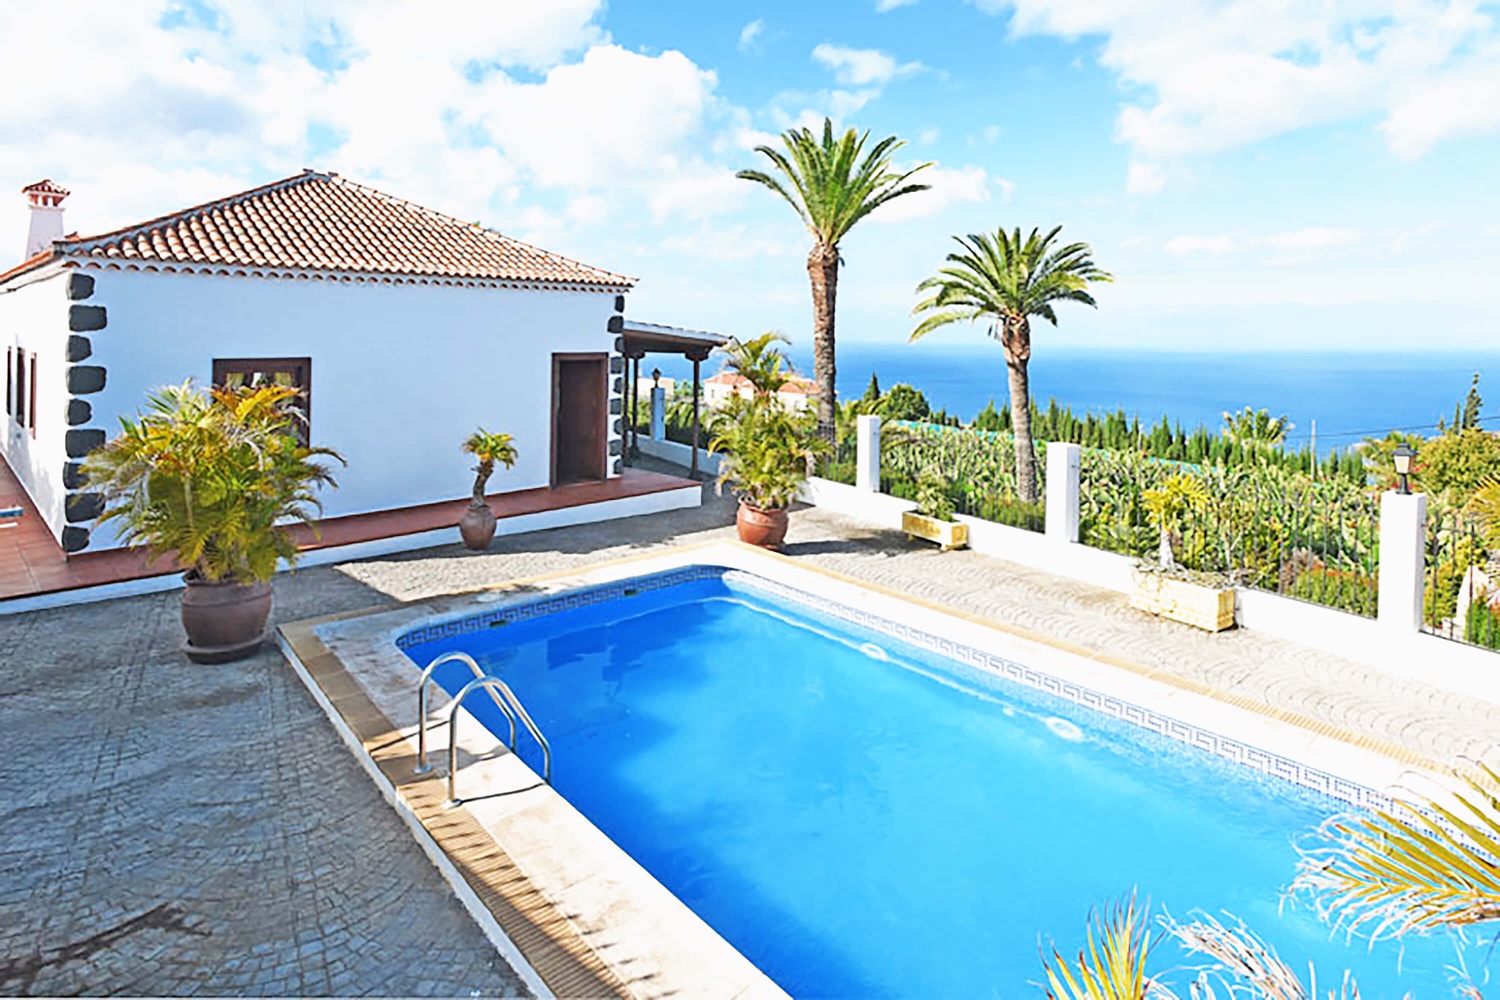 Elegant holiday home surrounded by palm trees with a large outdoor area, private pool and excellent sea views